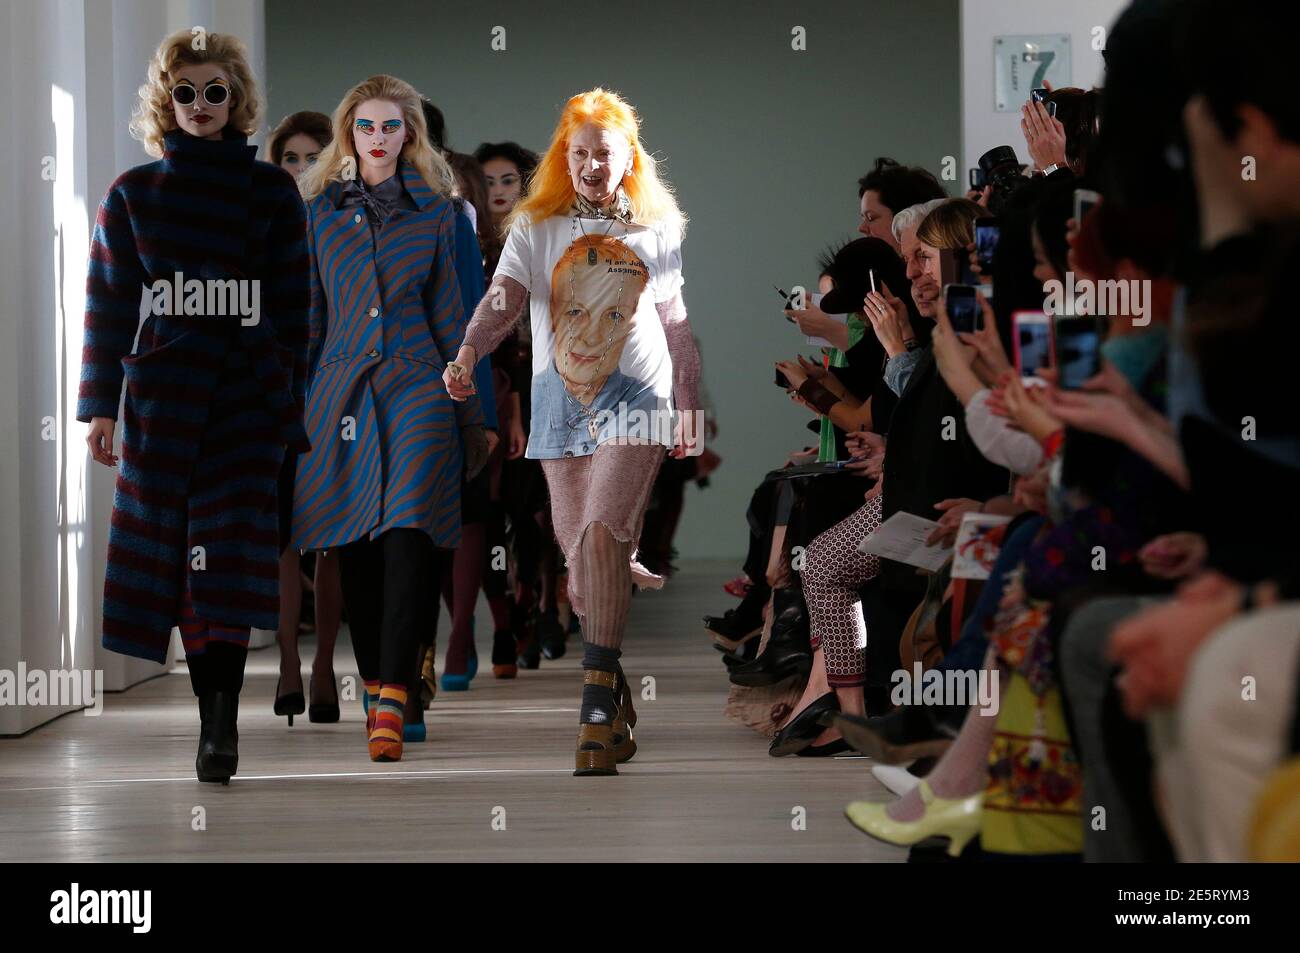 Vivienne Westwood joins her models on the catwalk after the Vivienne Westwood Red Label Autumn/Winter 2013 collection presentation during London Fashion Week, February 17, 2013. REUTERS/Suzanne Plunkett (BRITAIN - Tags: FASHION) Stock Photo